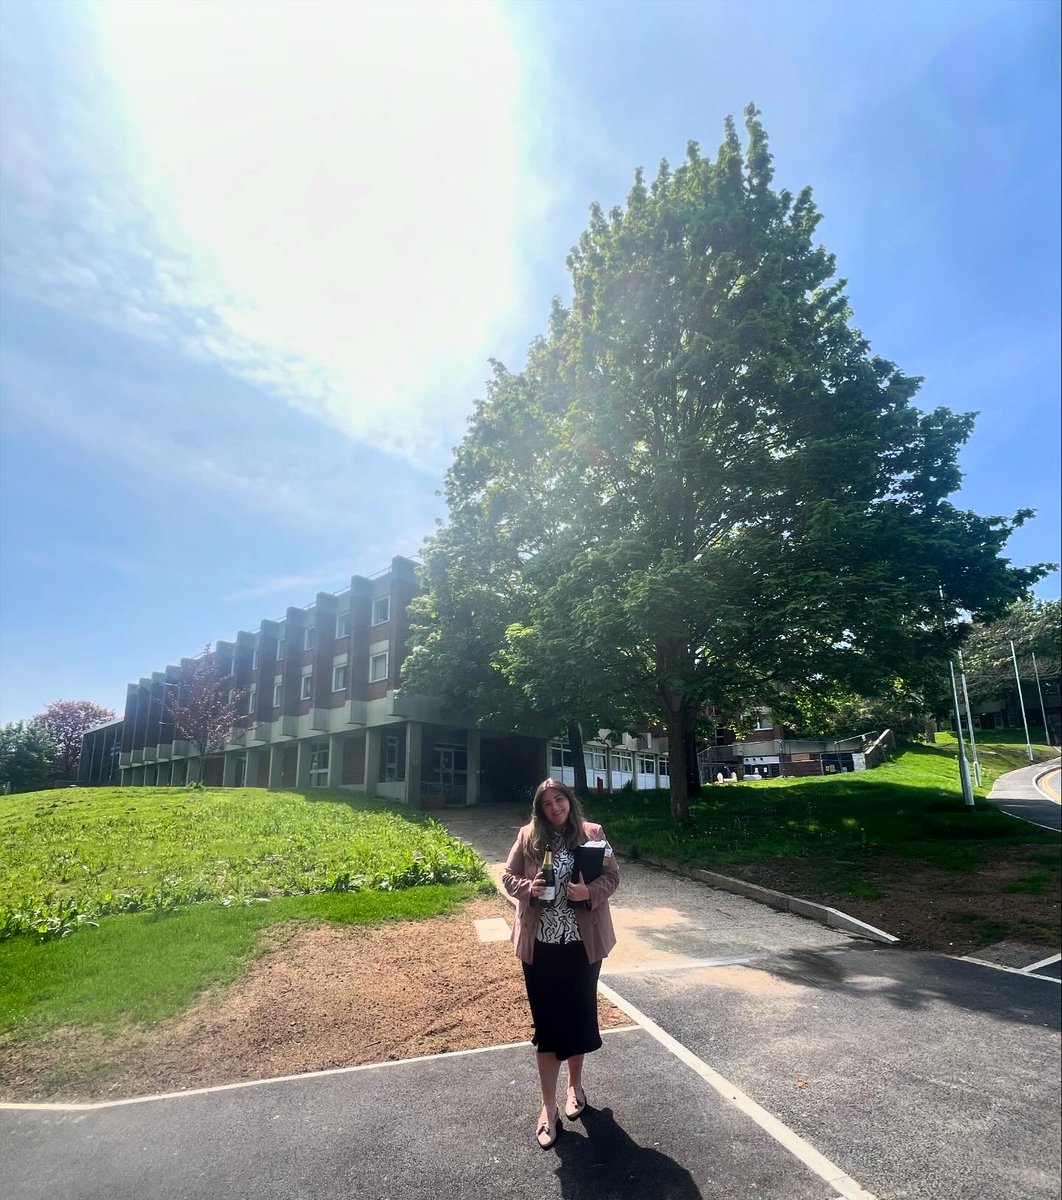 🏆 Huge congratulations to @EvelynKeryova, who last week successfully defended her thesis titled 'Exploring Children and Young People’s Critical Thinking: The Case of YouTube' 🎉 Evelyn was supervised by Professor Rachel Thomson and Dr @liamberriman. Well done Dr Polacek Kery! 👏